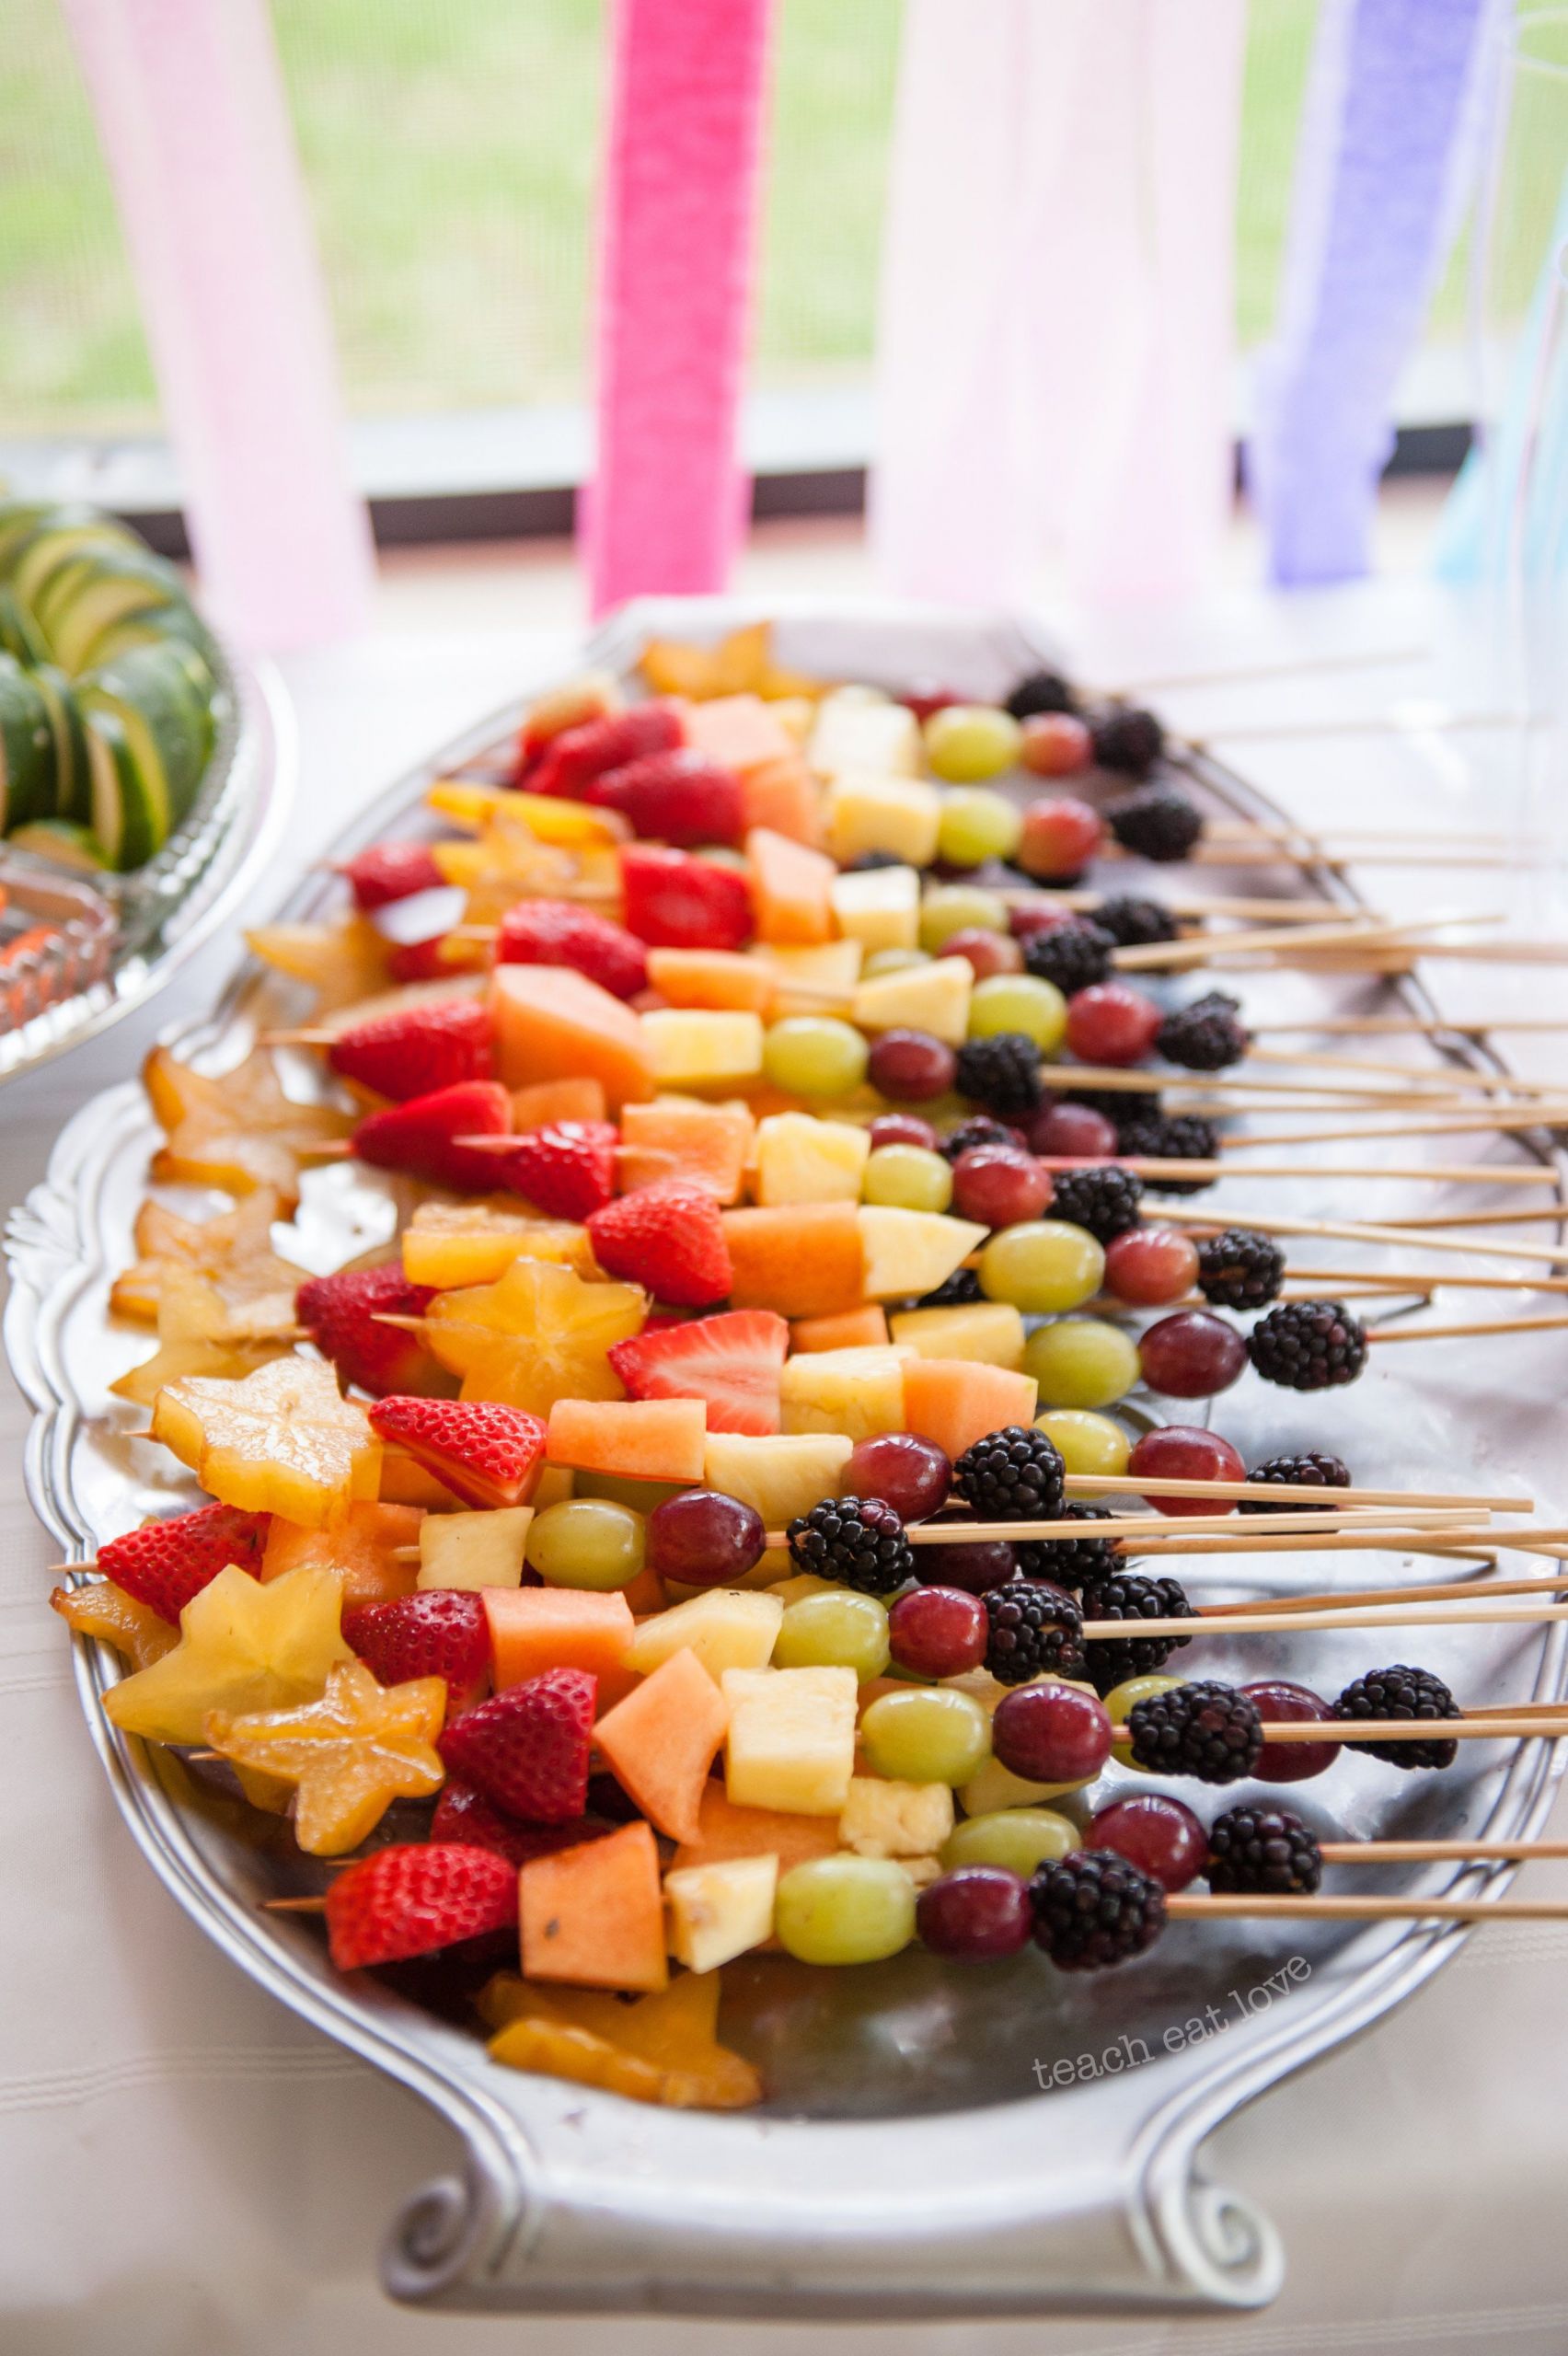 Boys Birthday Party Food Ideas
 The Baby’s First Birthday Recipe Round up and Fruit